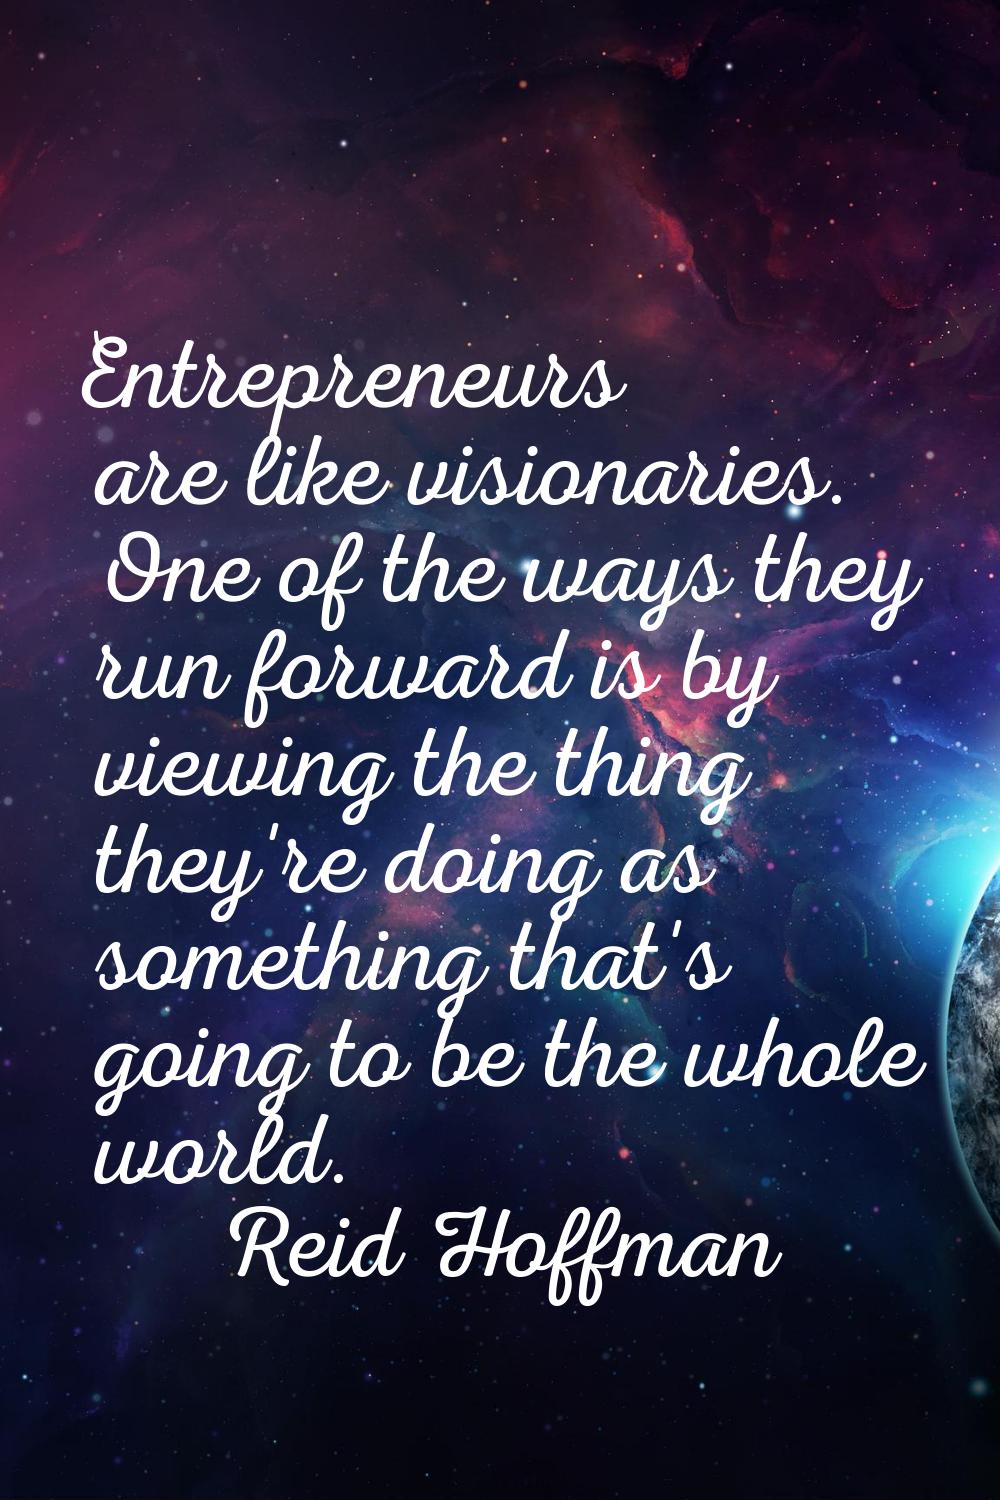 Entrepreneurs are like visionaries. One of the ways they run forward is by viewing the thing they'r